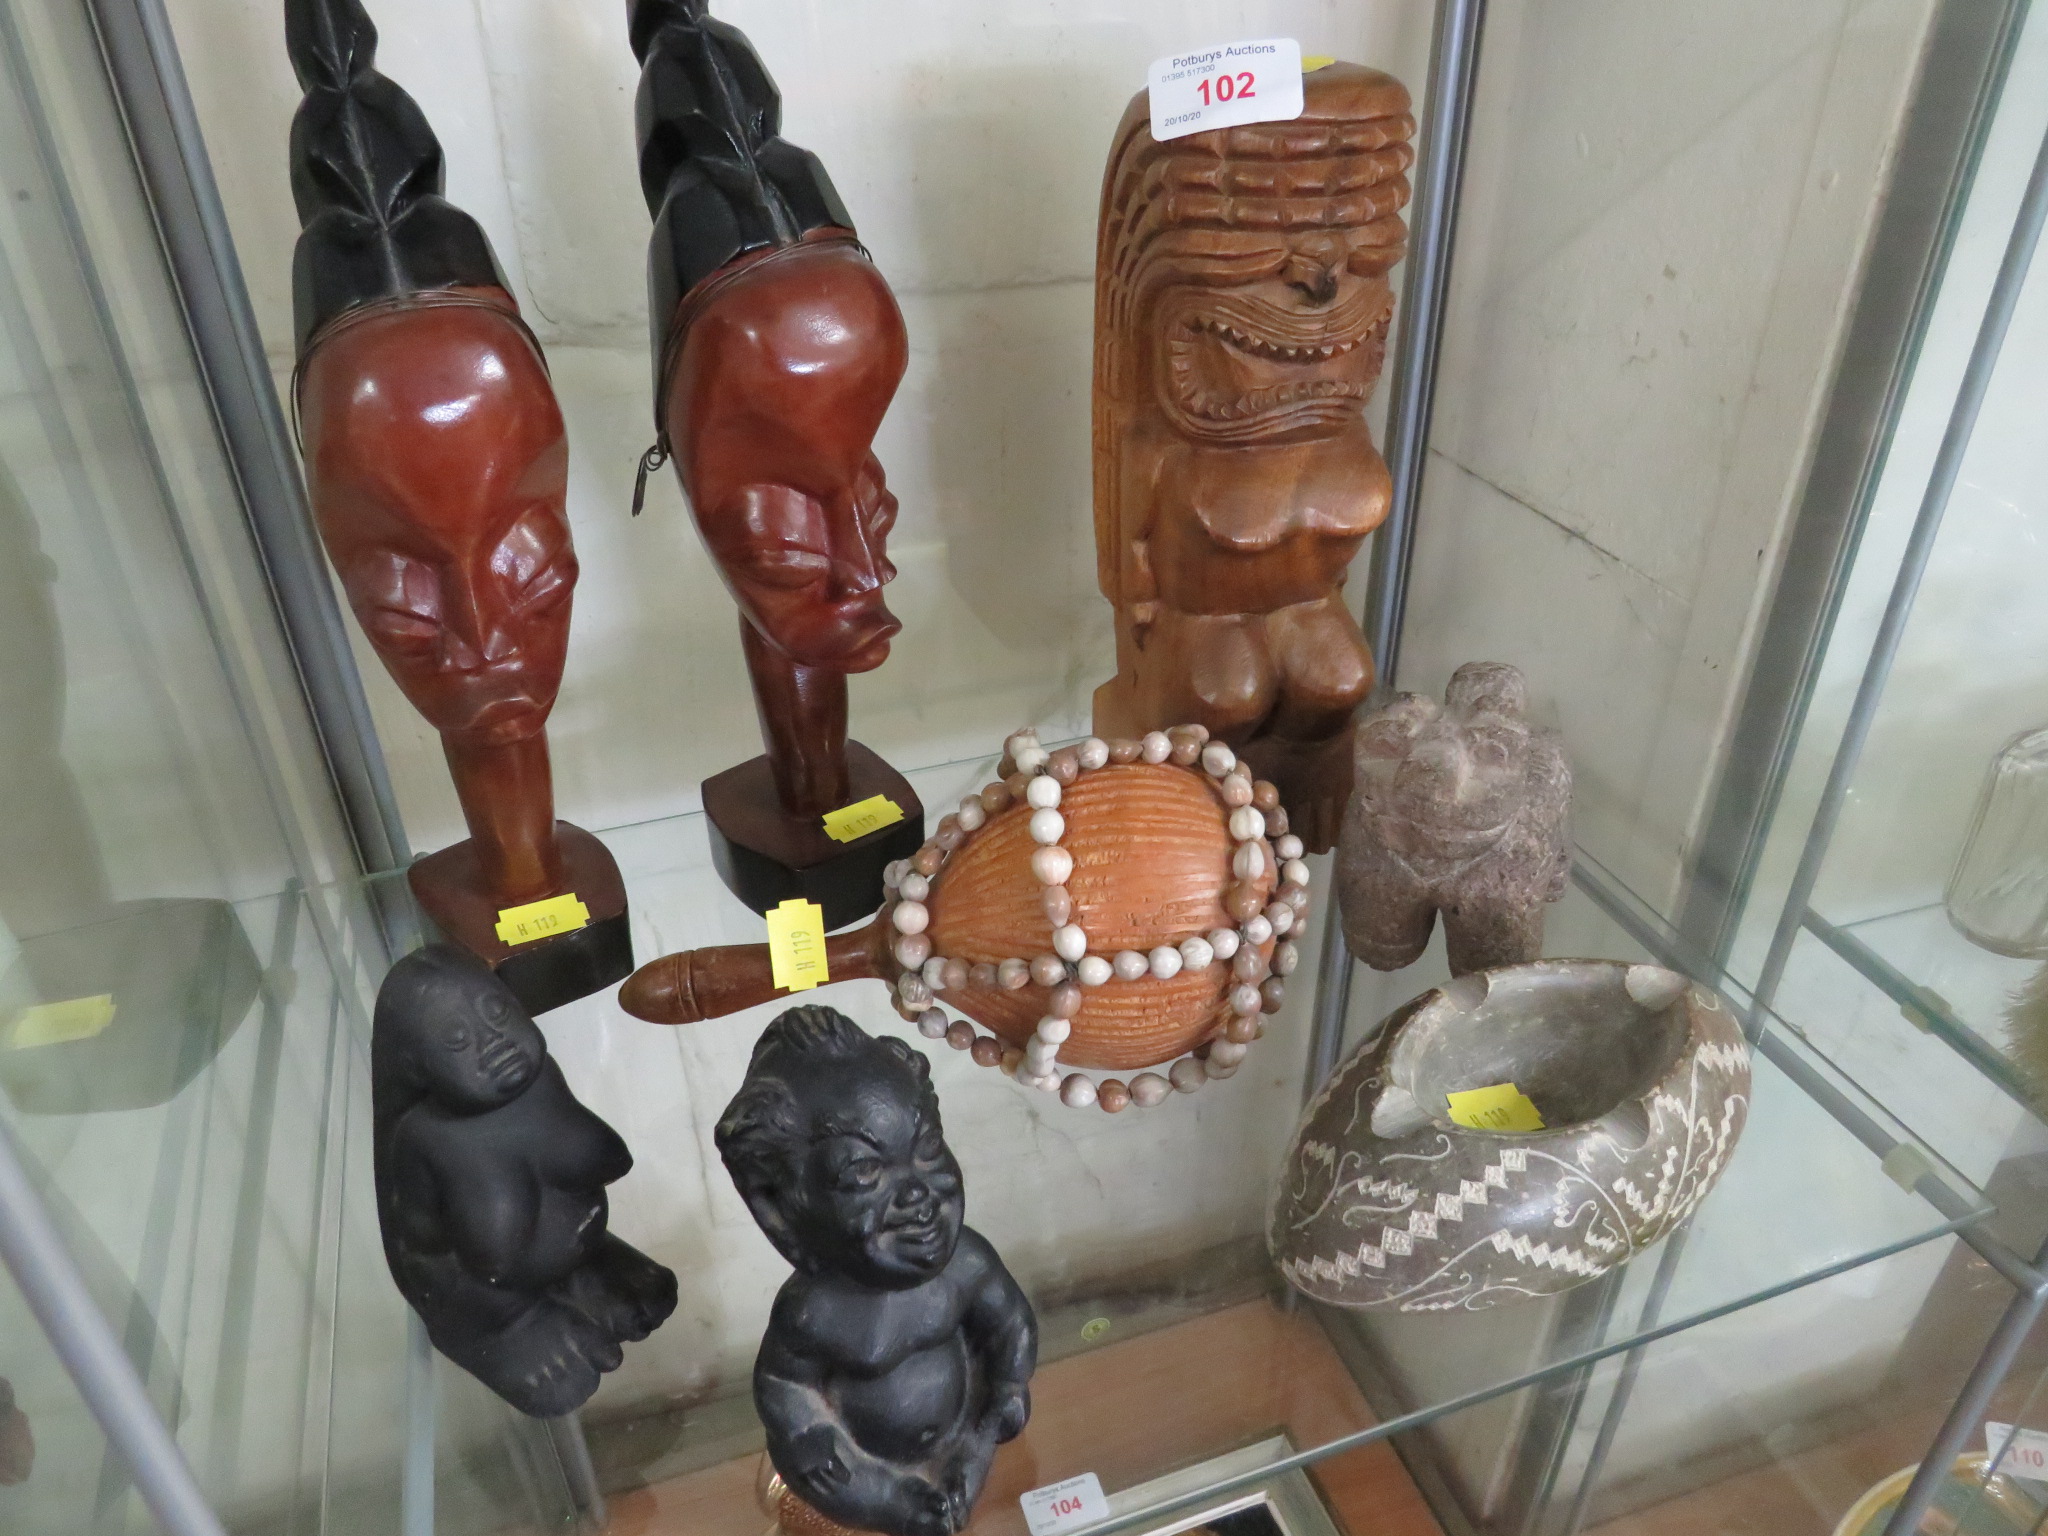 CARVED WOODEN TRIBAL STYLE FIGURES, HAWAIIAN LAVA FERTILITY FIGURE, CARVED STONE DOG, ASH TRAY AND